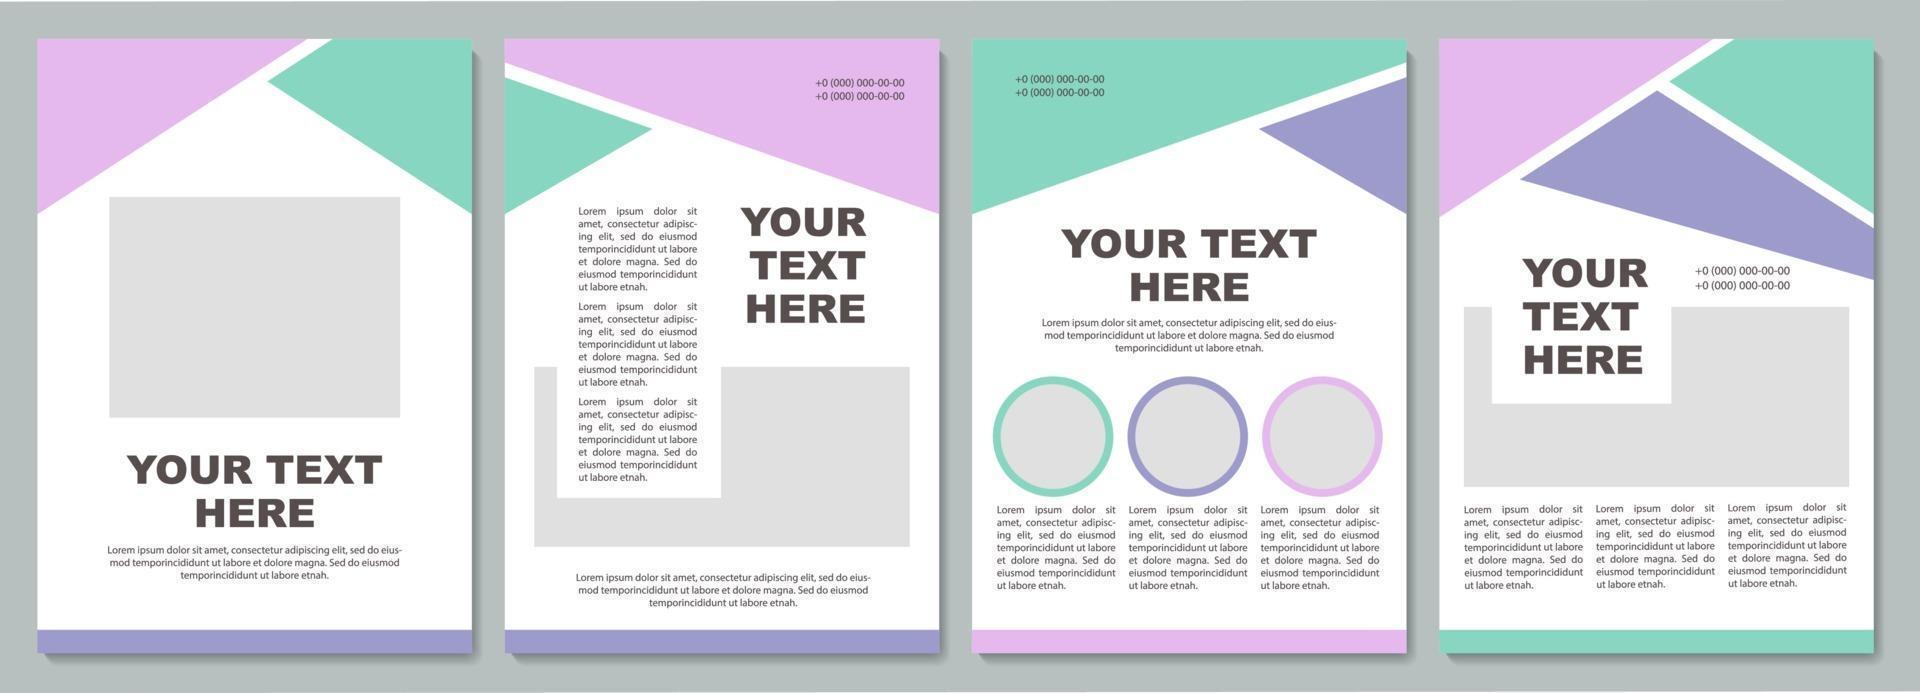 Business strategy creative brochure template vector